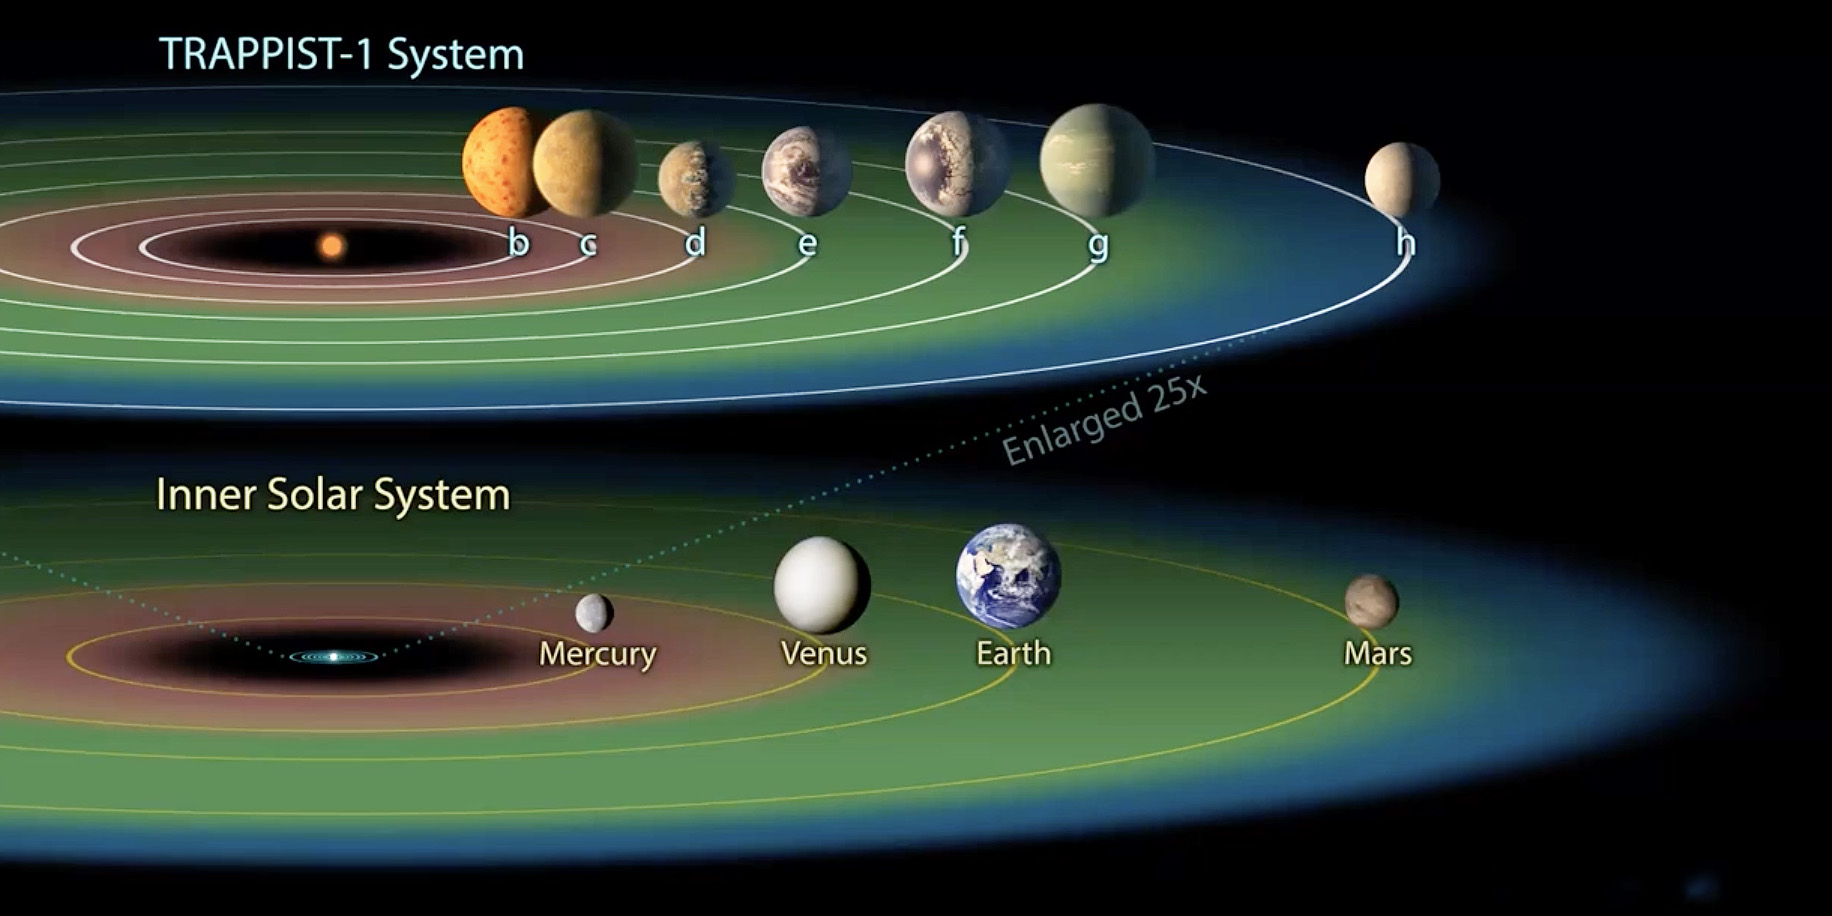 illustration comparing Earth's solar system with the Trappist system